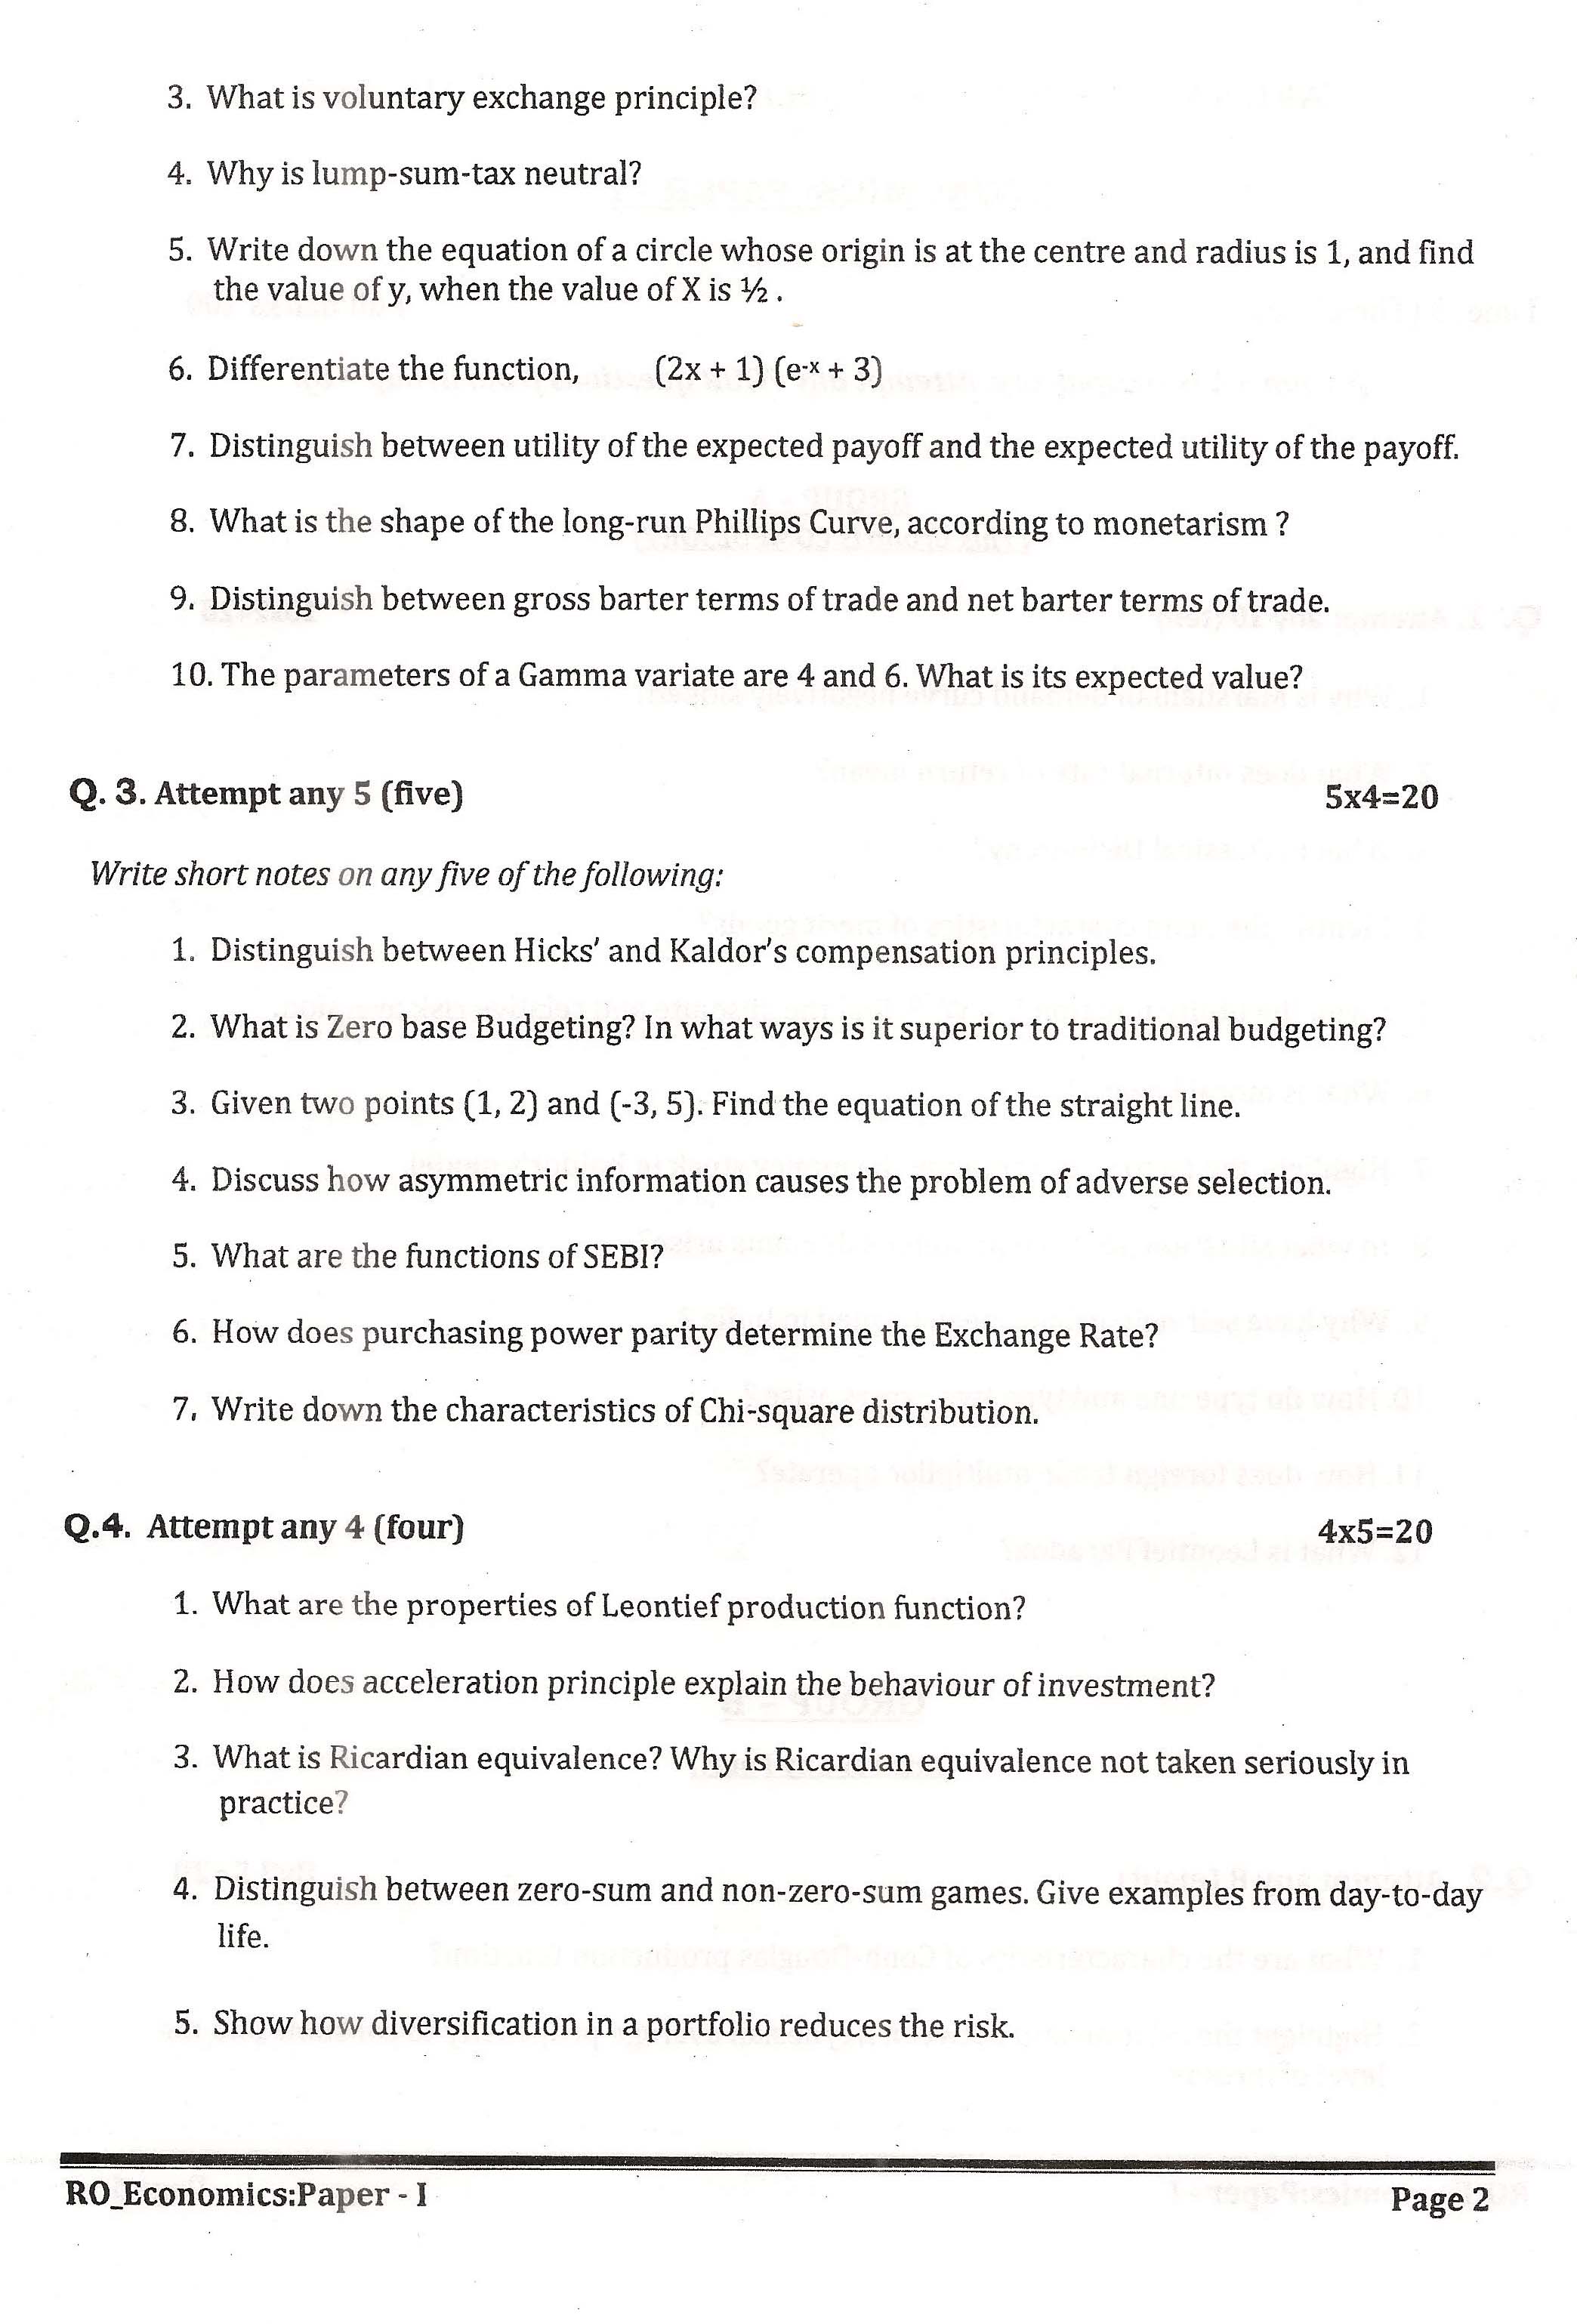 APPSC Research Officer Economics Paper I Exam Question Paper 2014 2